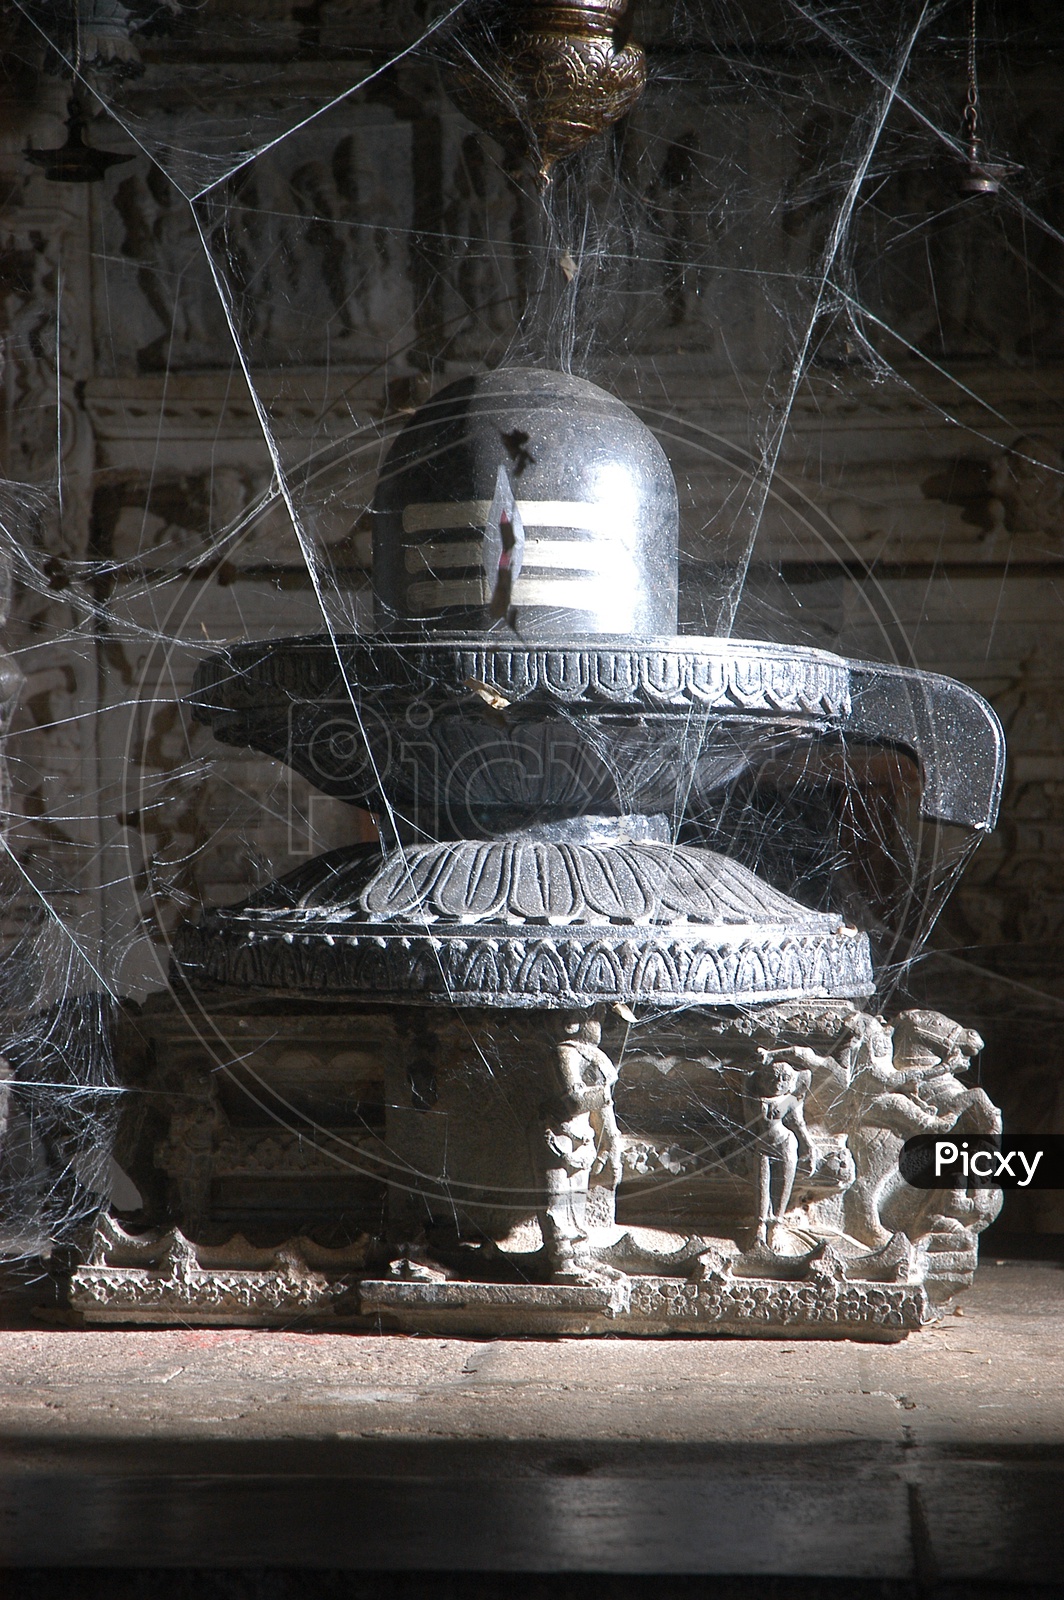 Image of Lord Shiva Lingam in a Old Temple-YB307637-Picxy